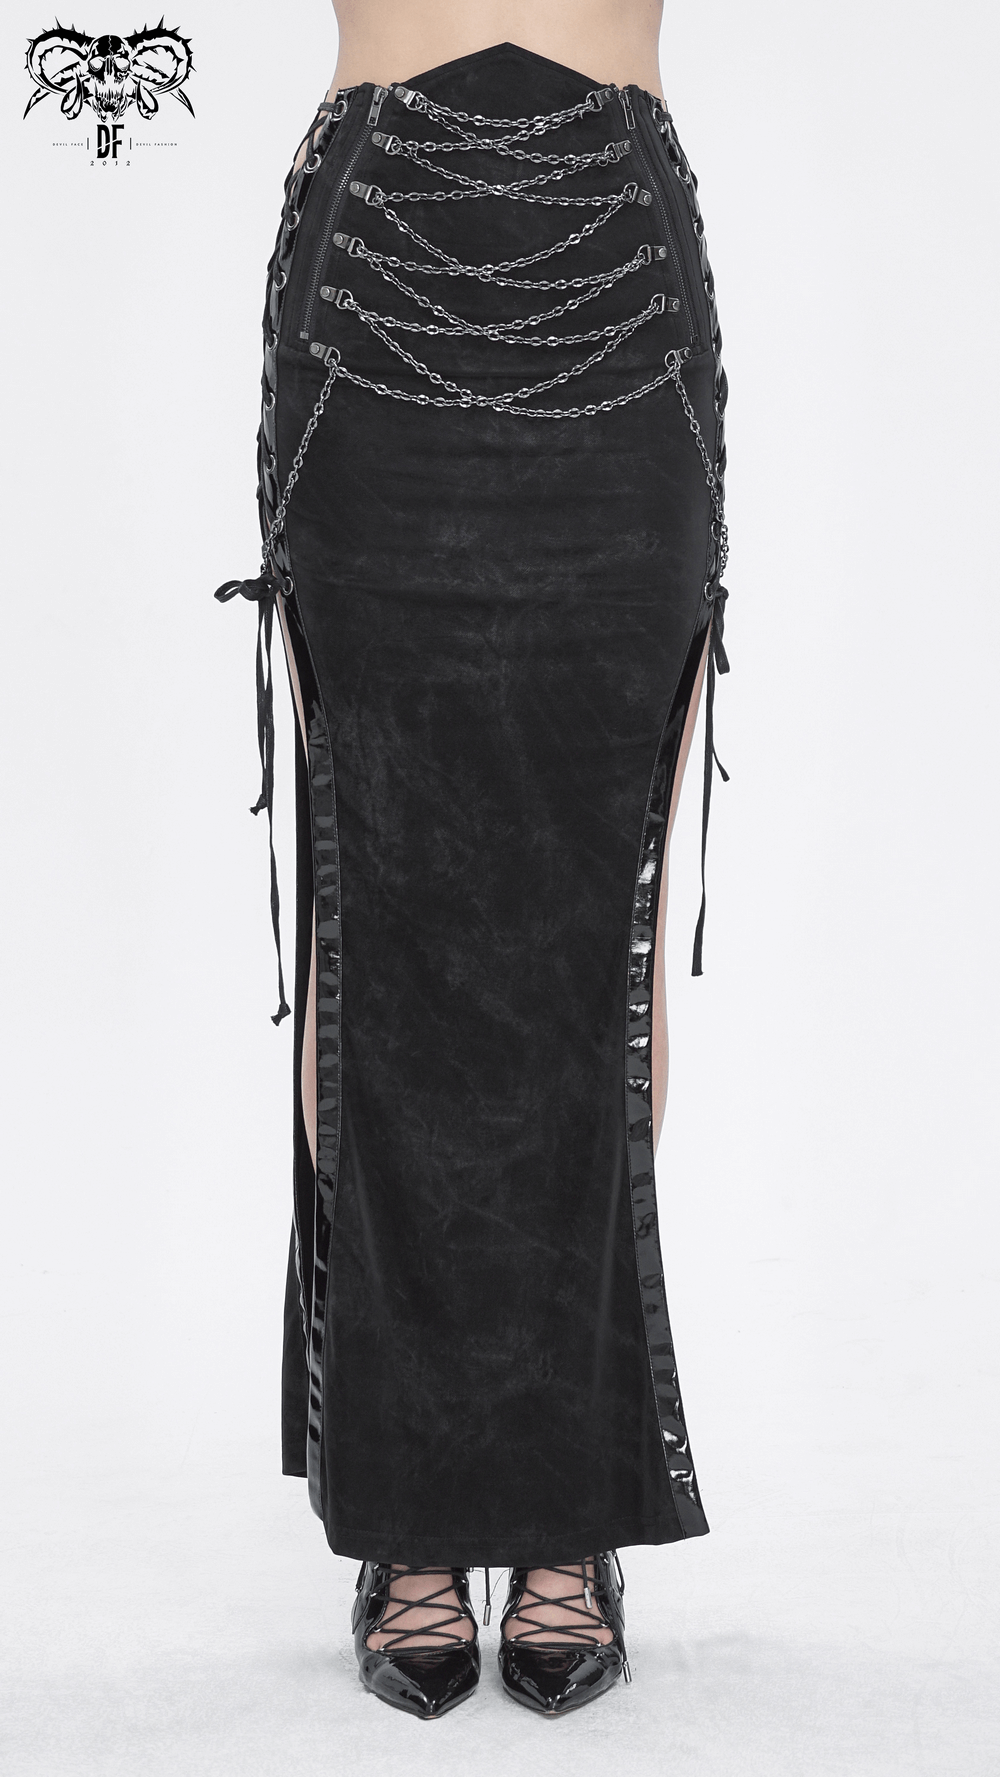 Sleek Black Maxi Skirt with Sides Lacing Details